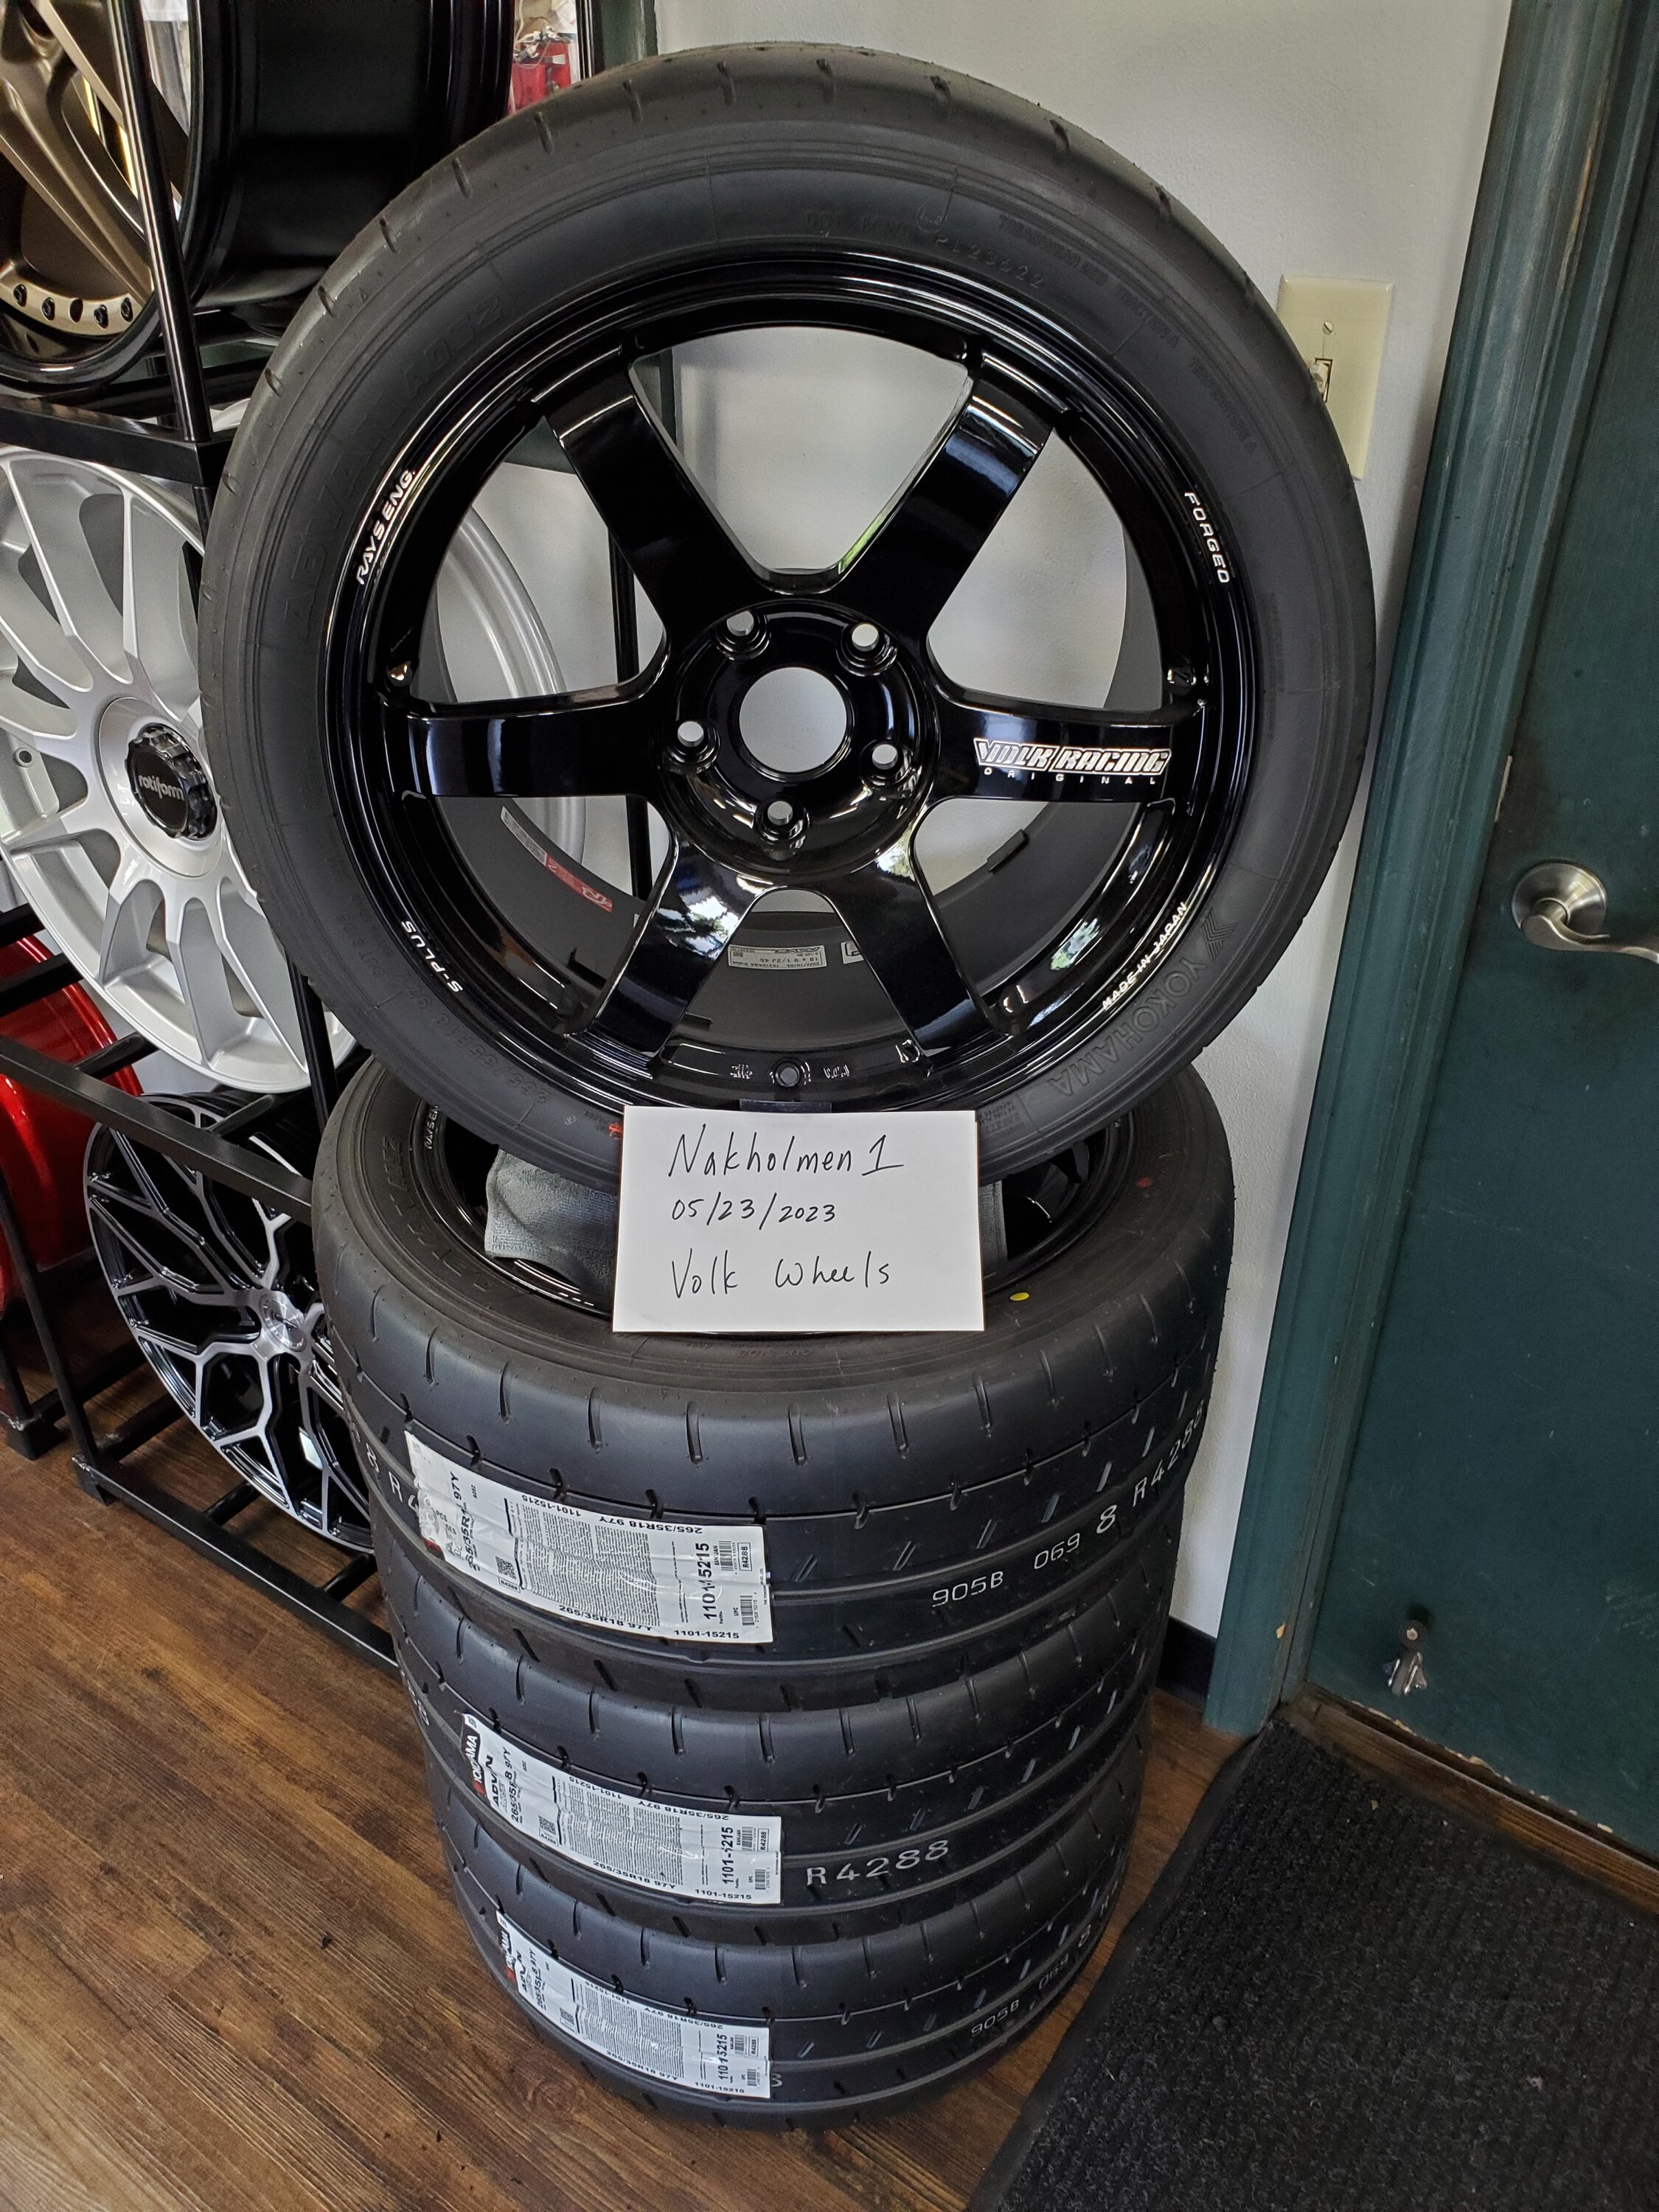 11th Gen Honda Civic Four Volk Te37's for sale - brand new - 18 x 9.5 for $3000. 20230523_152619